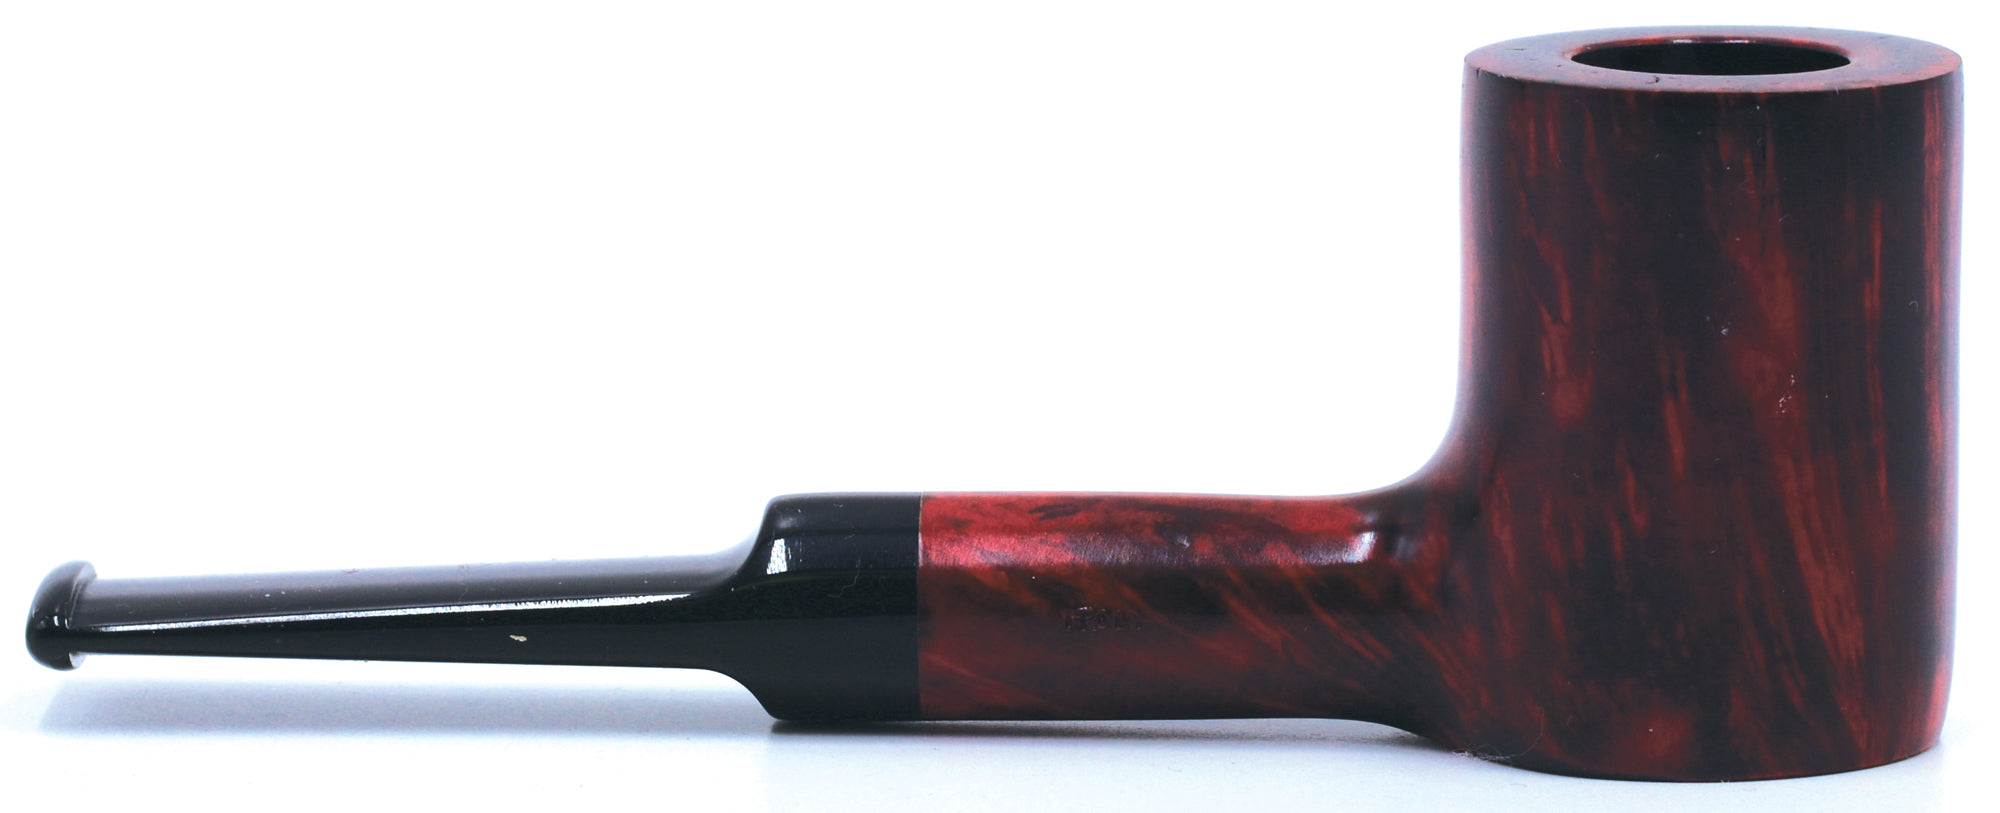 LEGENDEX® PAGANINI* 9 MM Filtered Briar Smoking Pipe Made In Italy 01-08-330